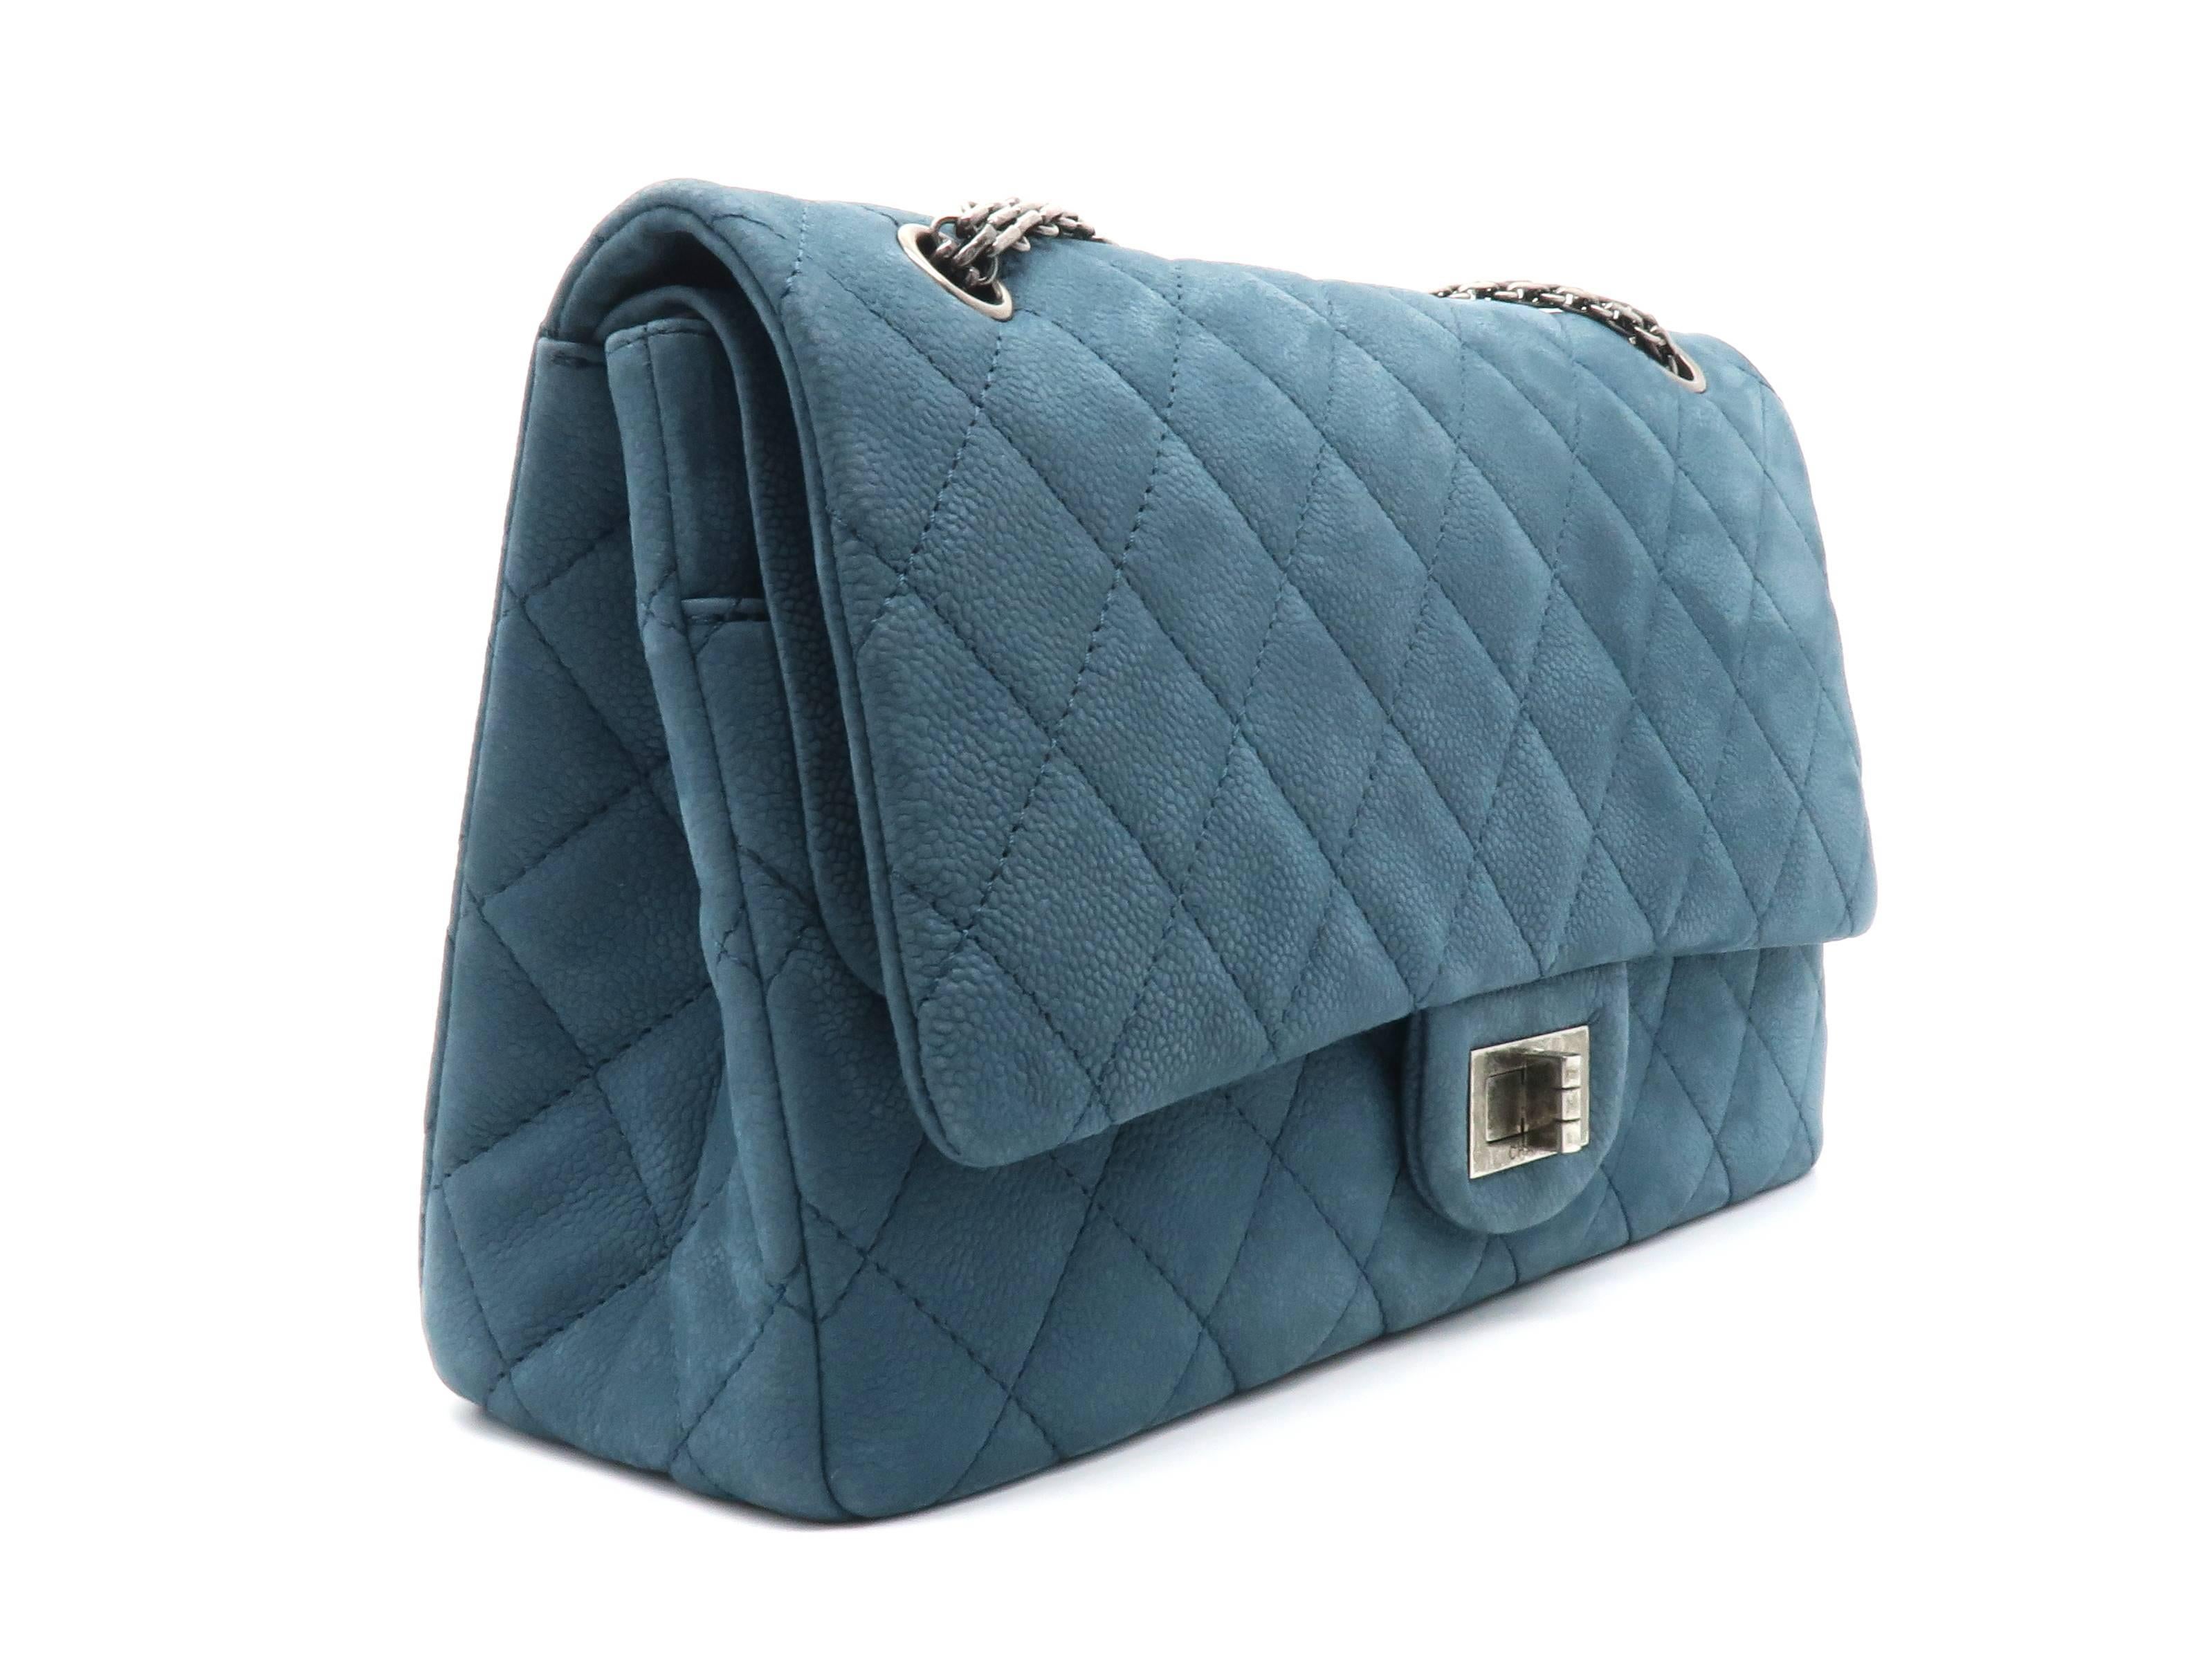 Color: Blue 

Material: Caviar Leather

Condition: Rank A
Overall: Good, few minor defects 
Surface: Good
Corners: Minor Scratches
Edges: Good
Handles/Straps: Good
Hardware: Minor Scratches

Dimension: W31.5 × H19 × D10cm（W12.4" × H7.4" ×